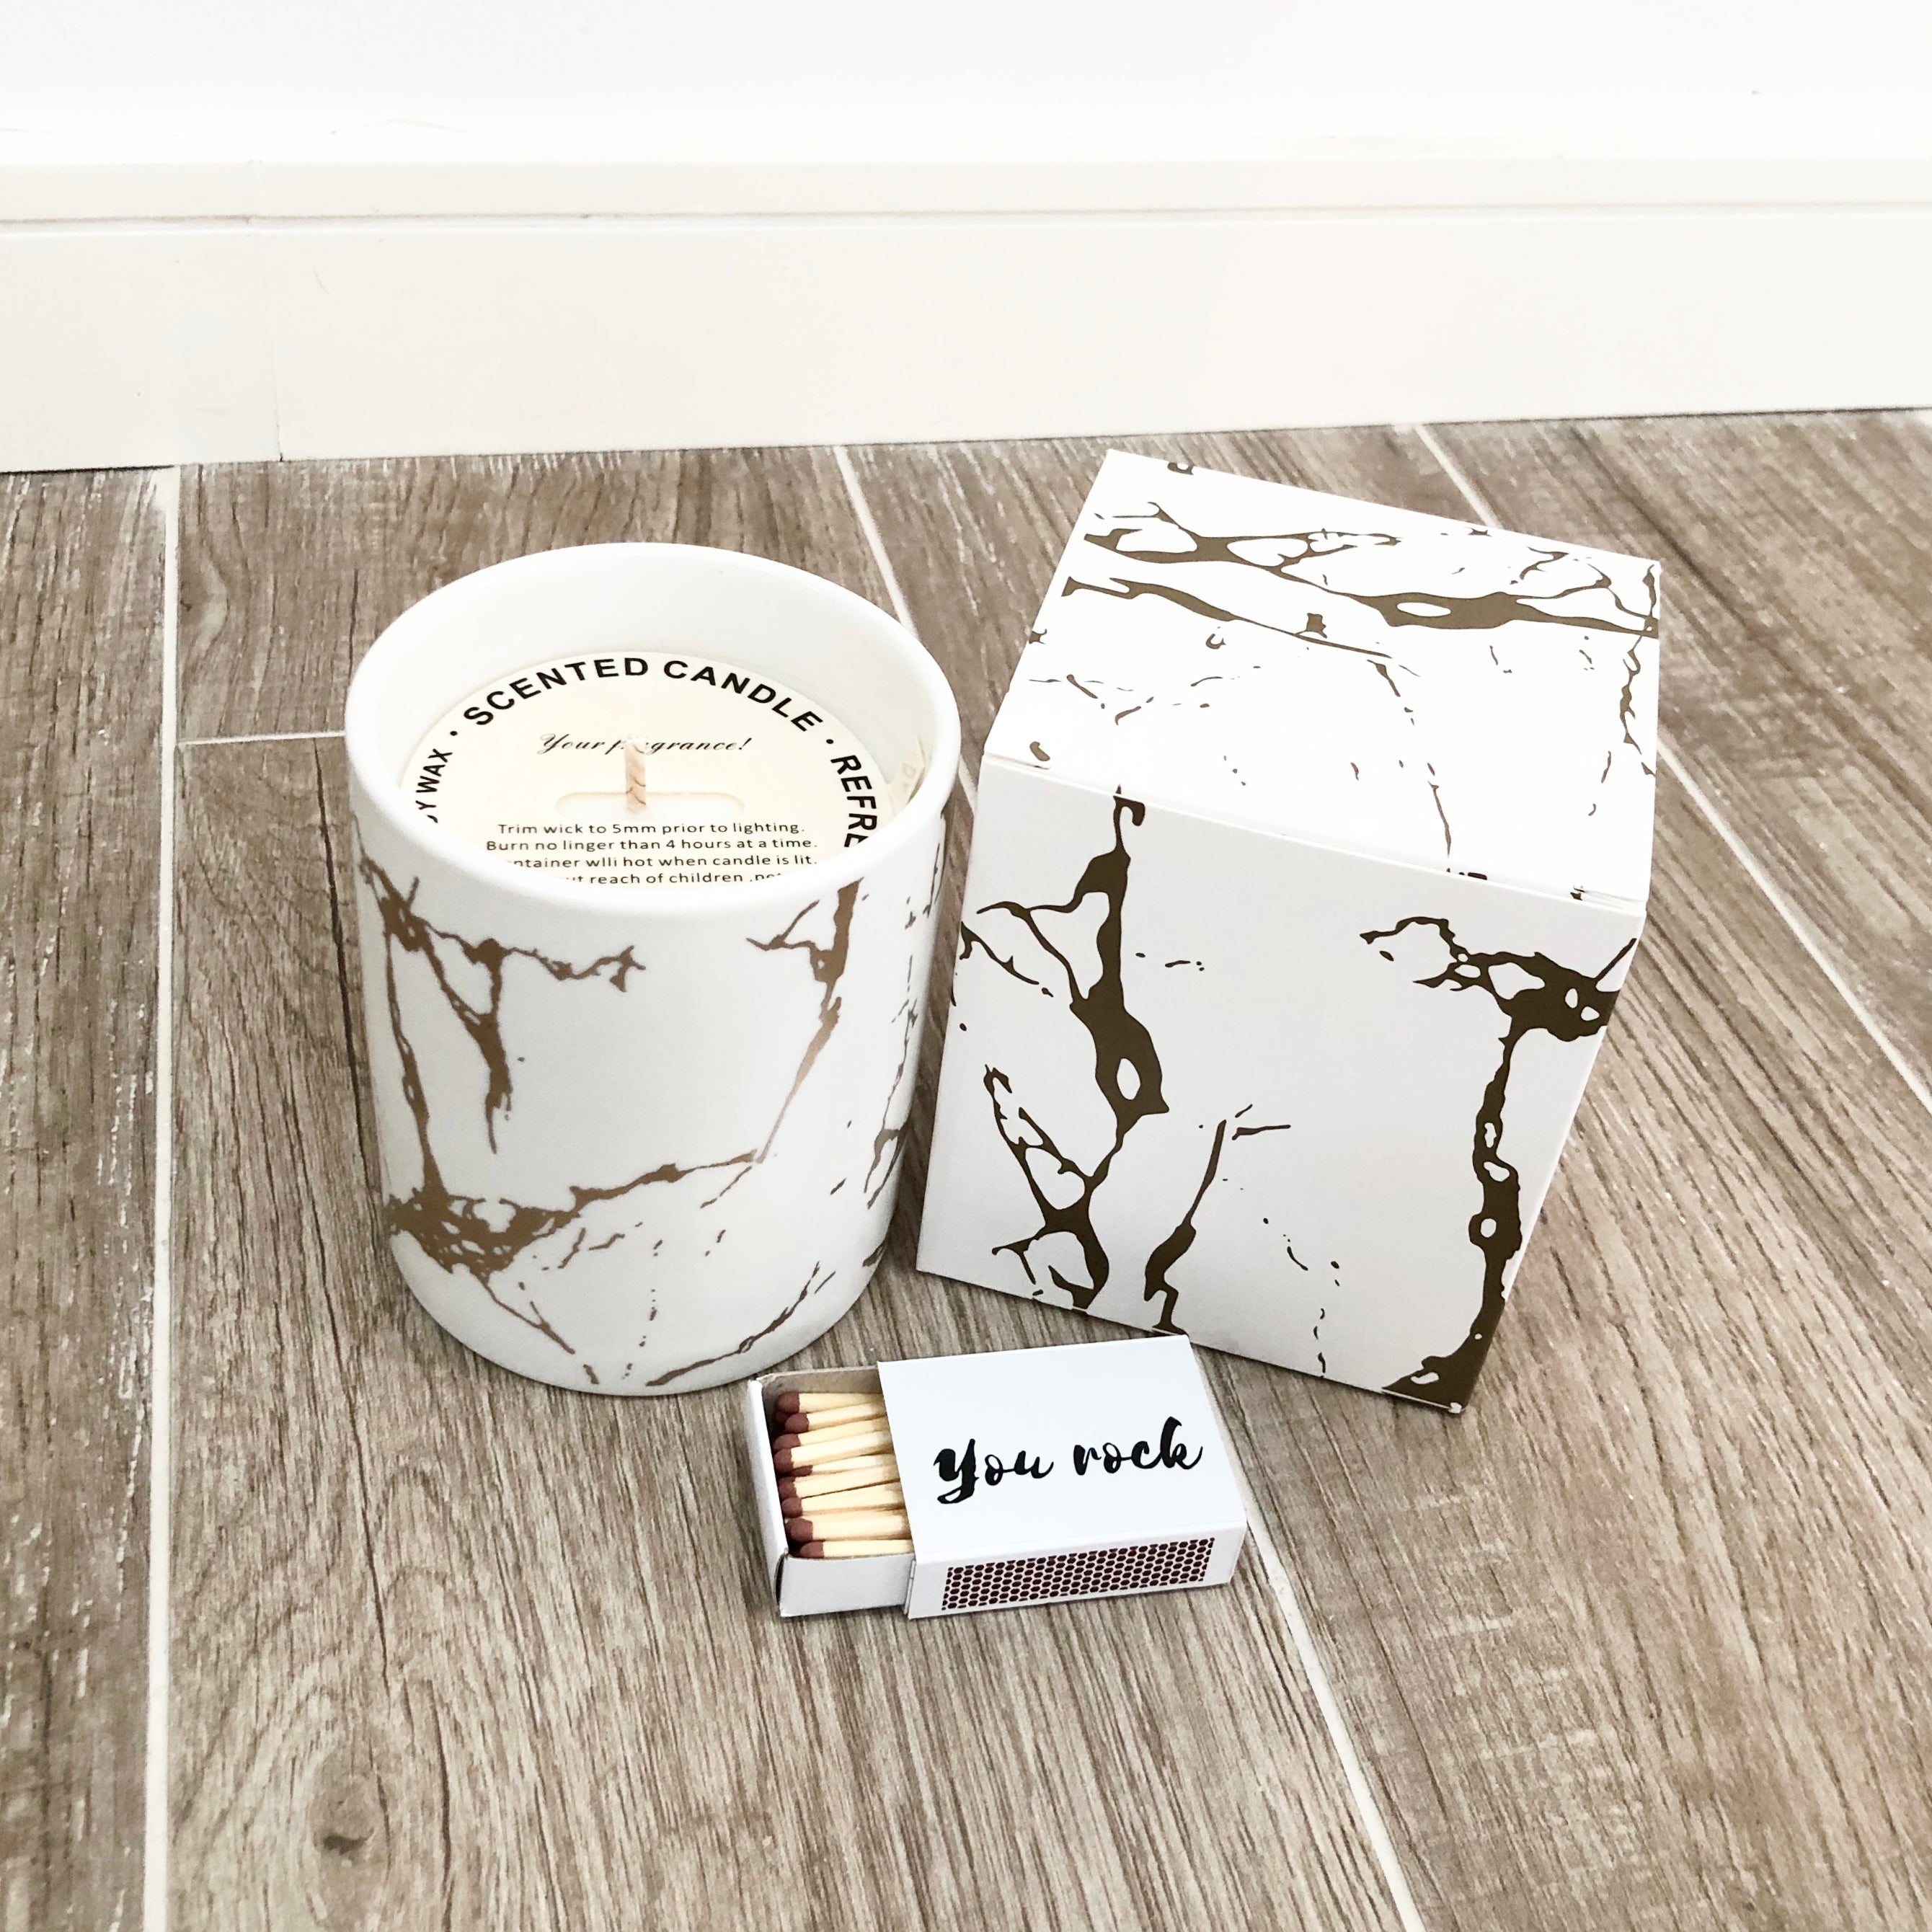 Ceramic Soy Wax Scented Candle 